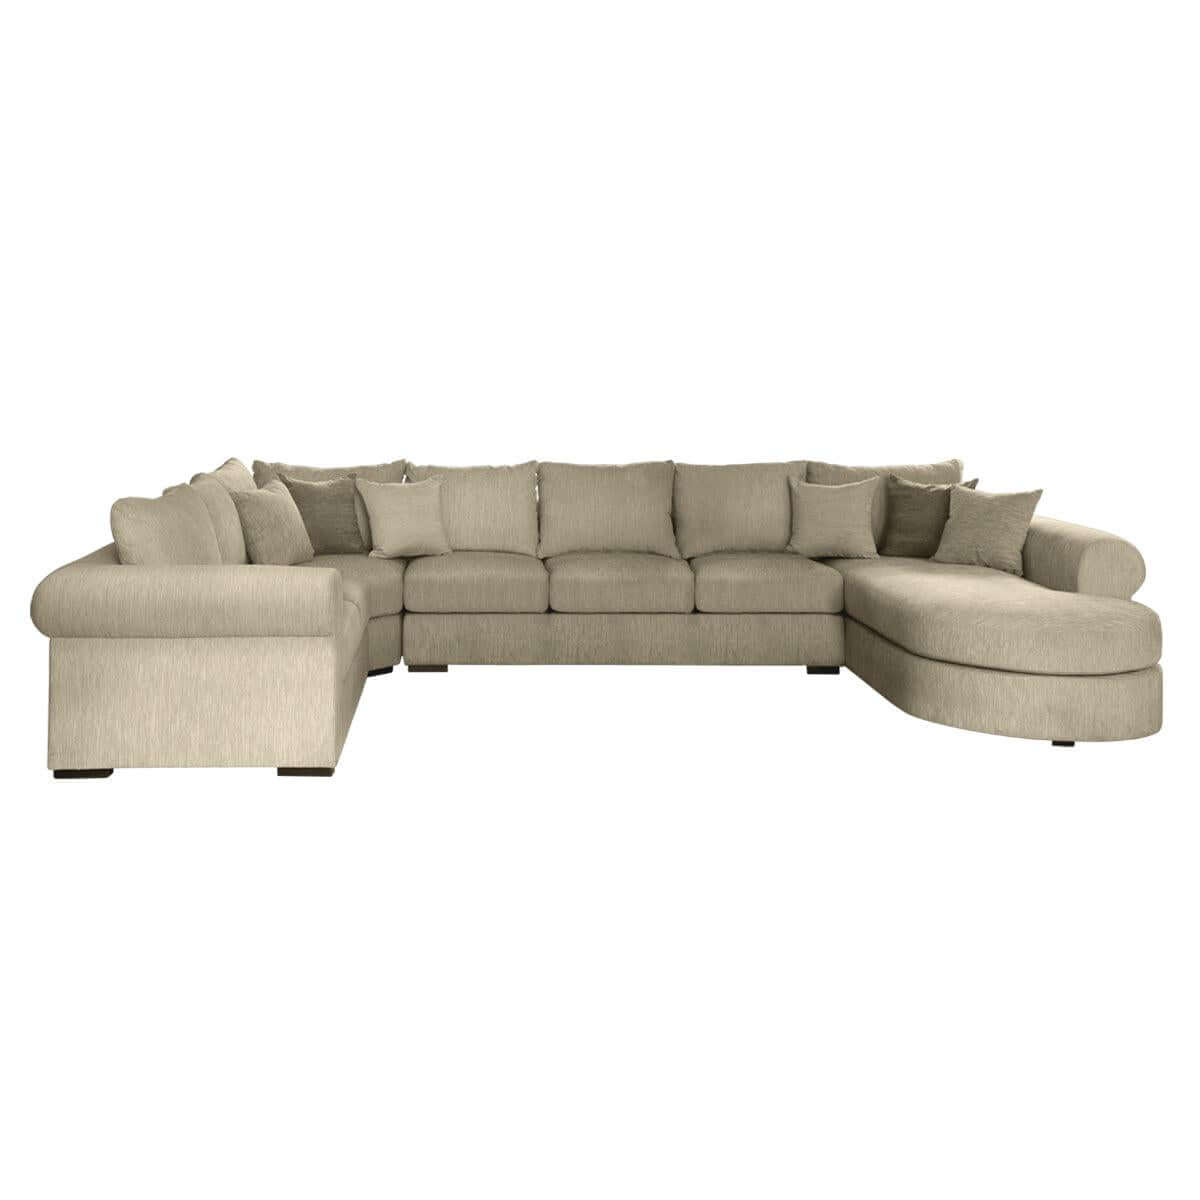 Tuscany Sectional Sofa - classic look paired with modern 